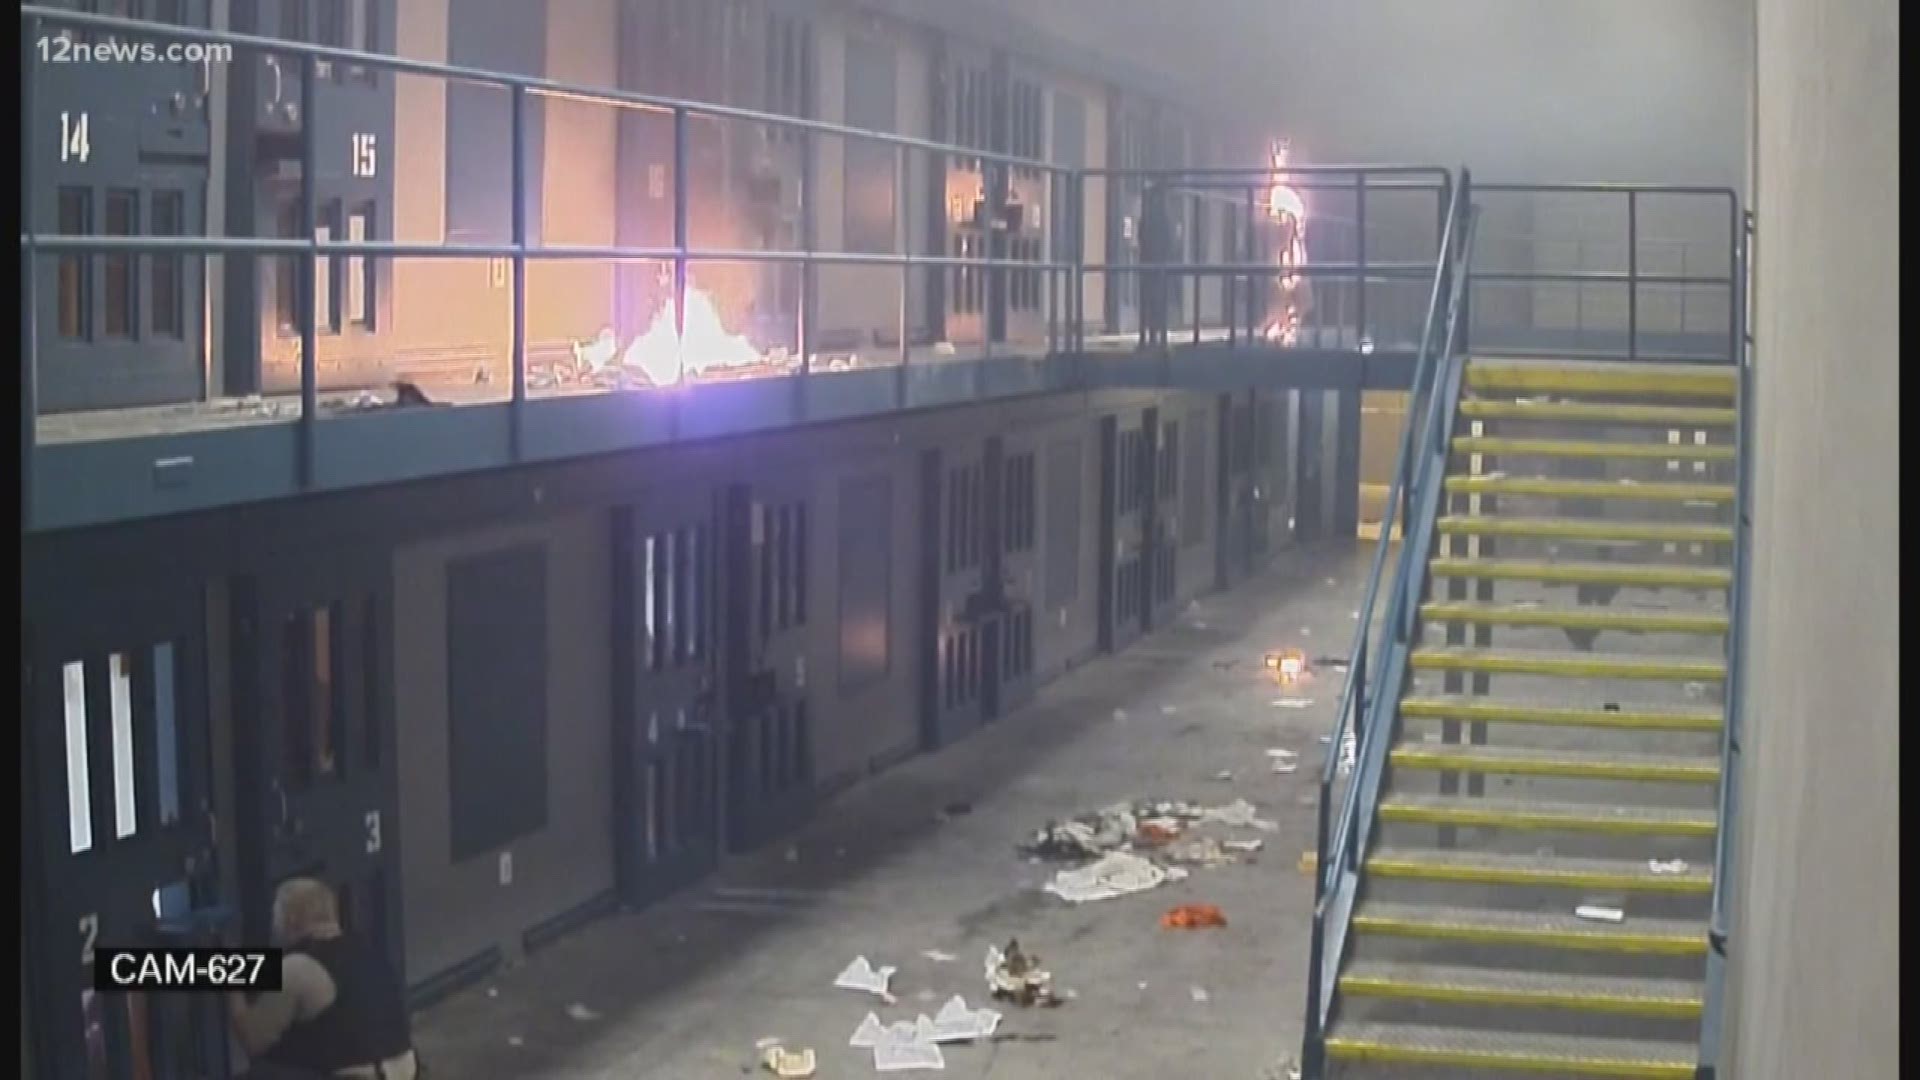 New video captures inmates in the setting fires inside Lewis Prison as corrections officers look on. This is the latest video coming from the same state prison where cell doors did not lock, allowing inmates to assault officers.